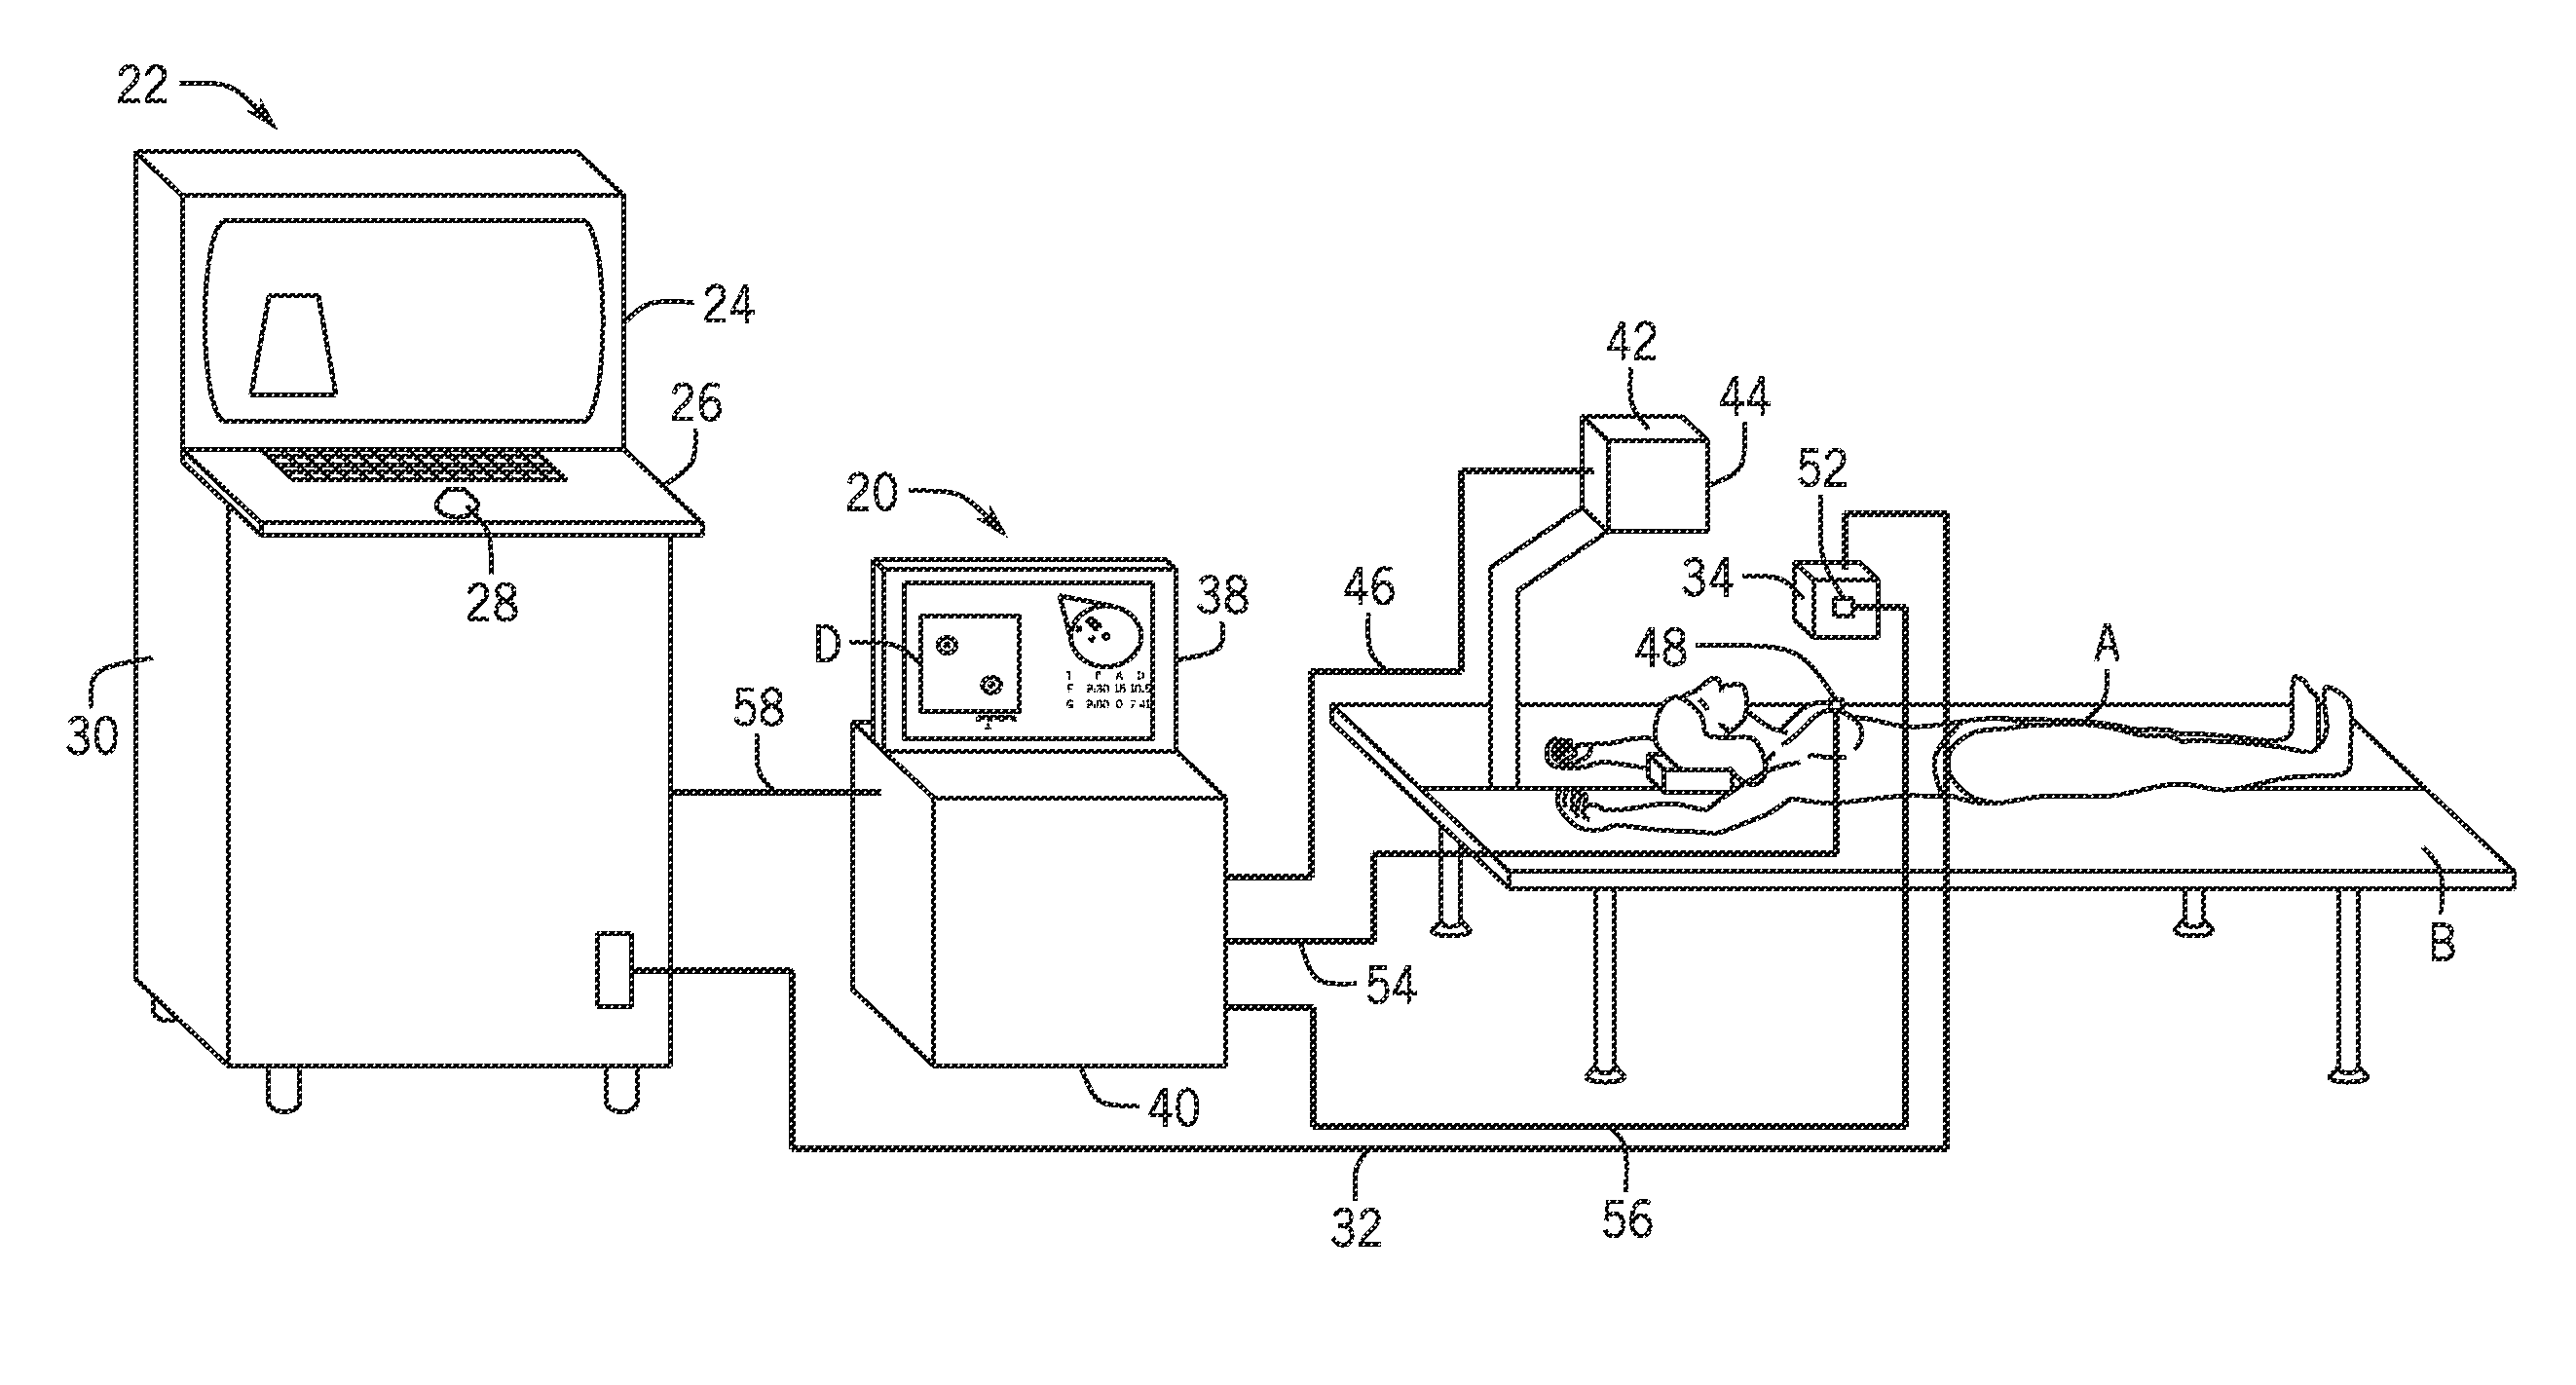 Sensor Attachment for Three Dimensional Mapping Display Systems for Diagnostic Ultrasound Machines